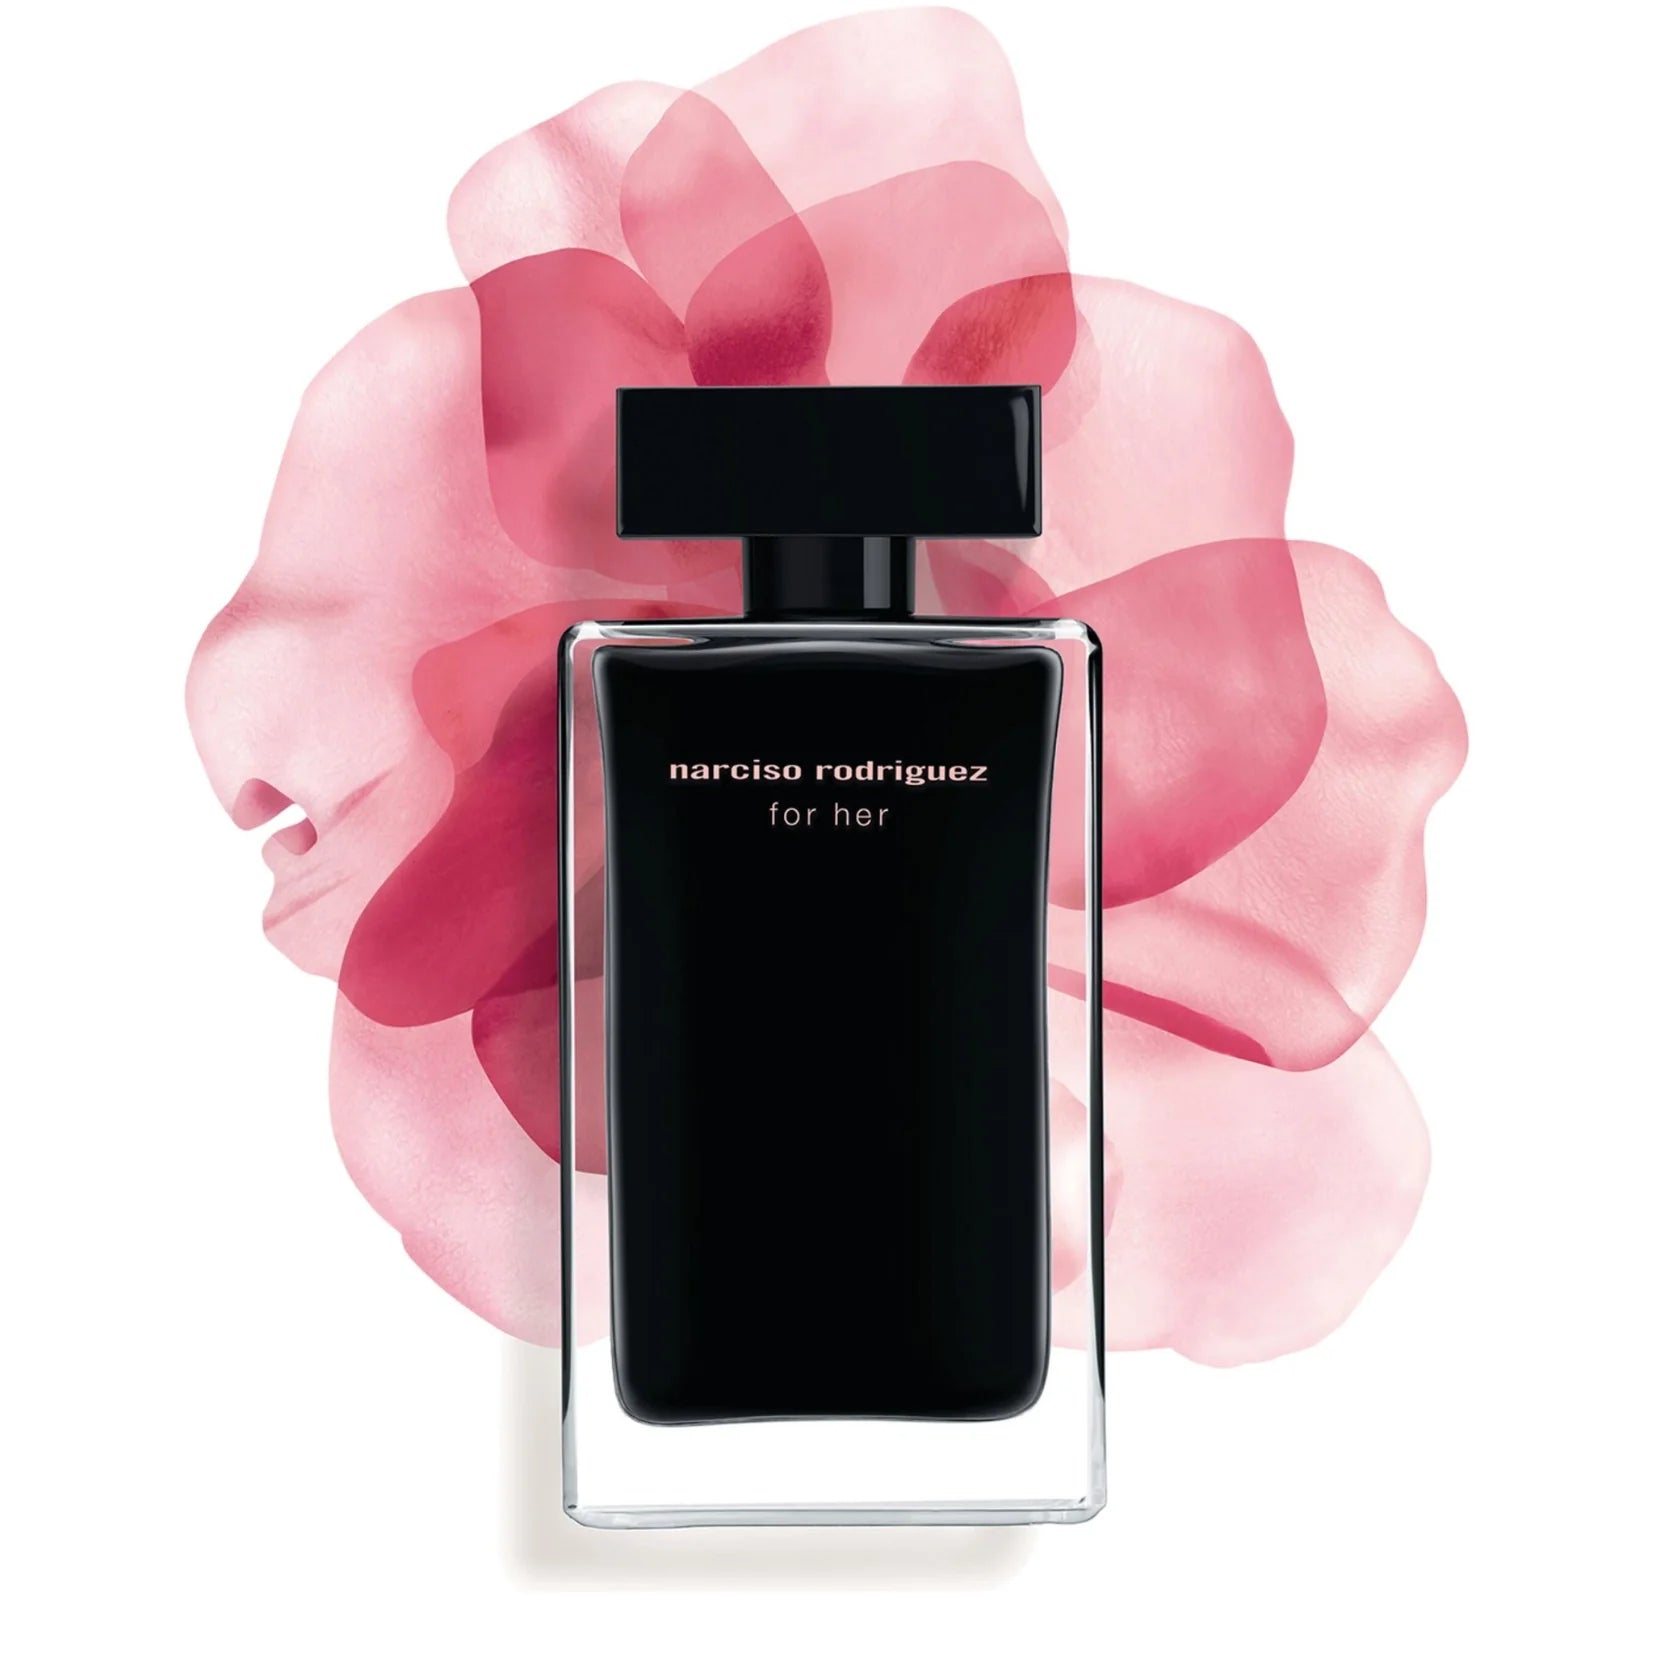 Narciso Rodriguez For Her EDT Trio Collection | My Perfume Shop Australia